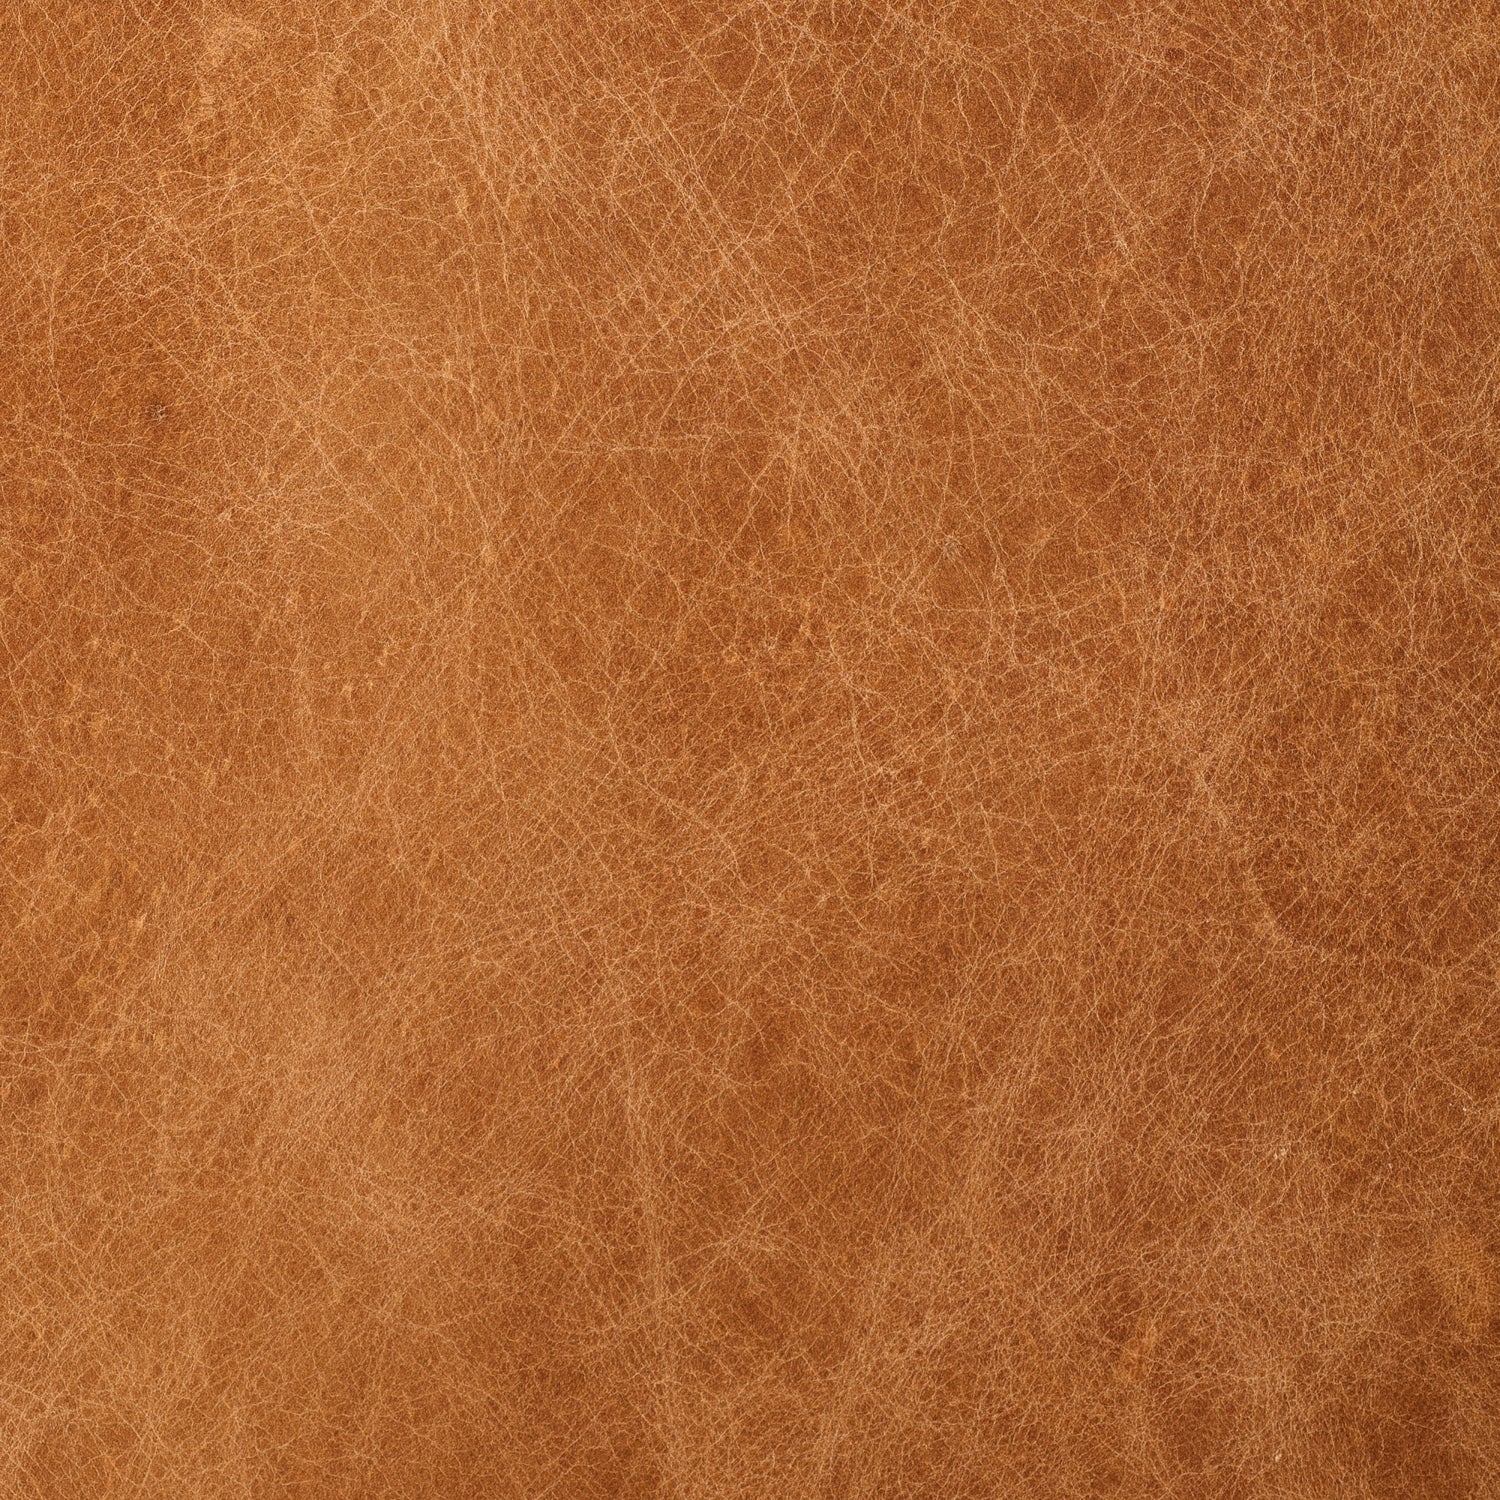 Leather Swatches Cognac Tan